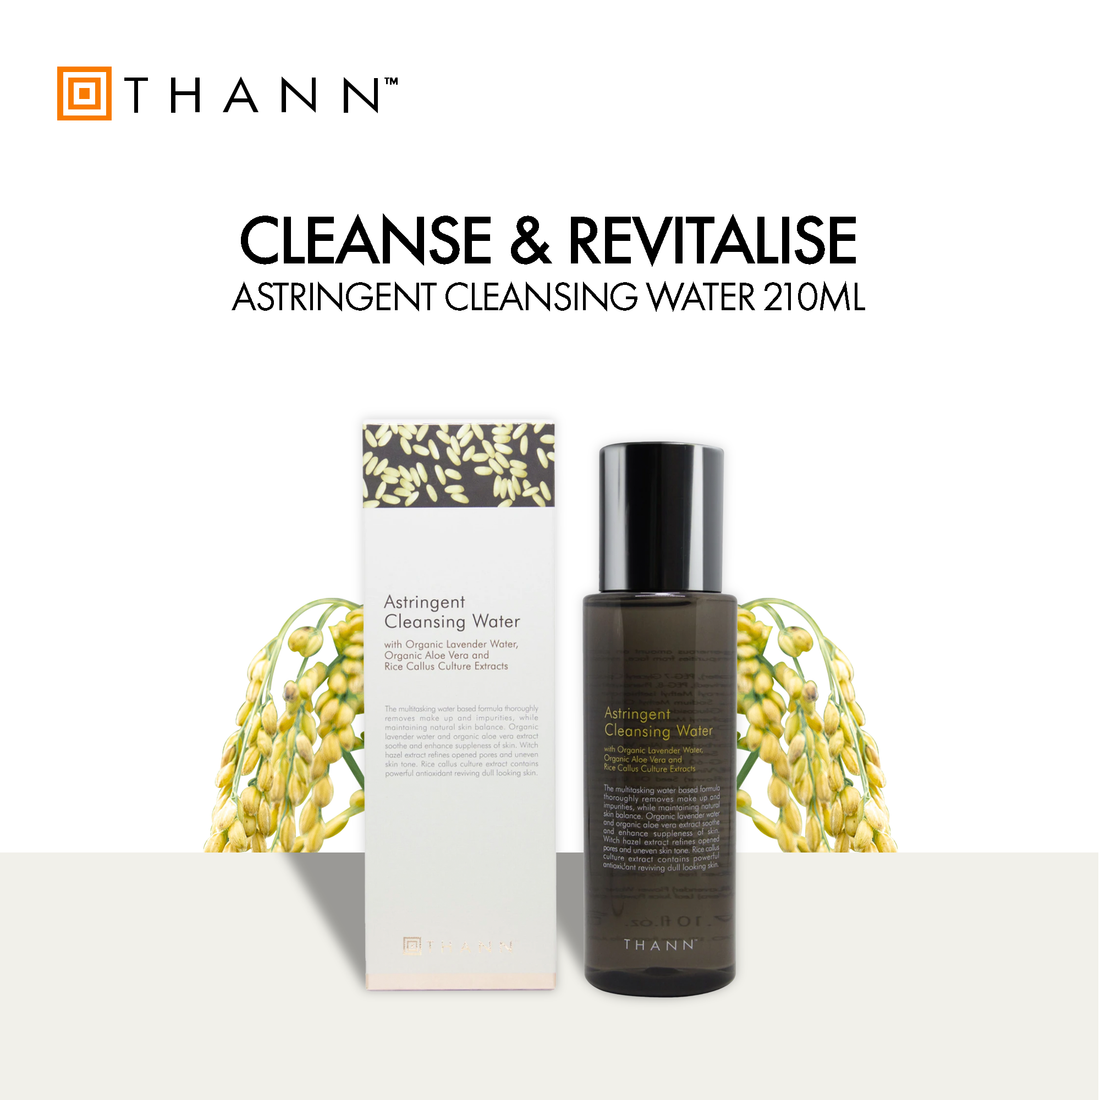 Astringent Cleansing Water 210ml - THANN Singapore